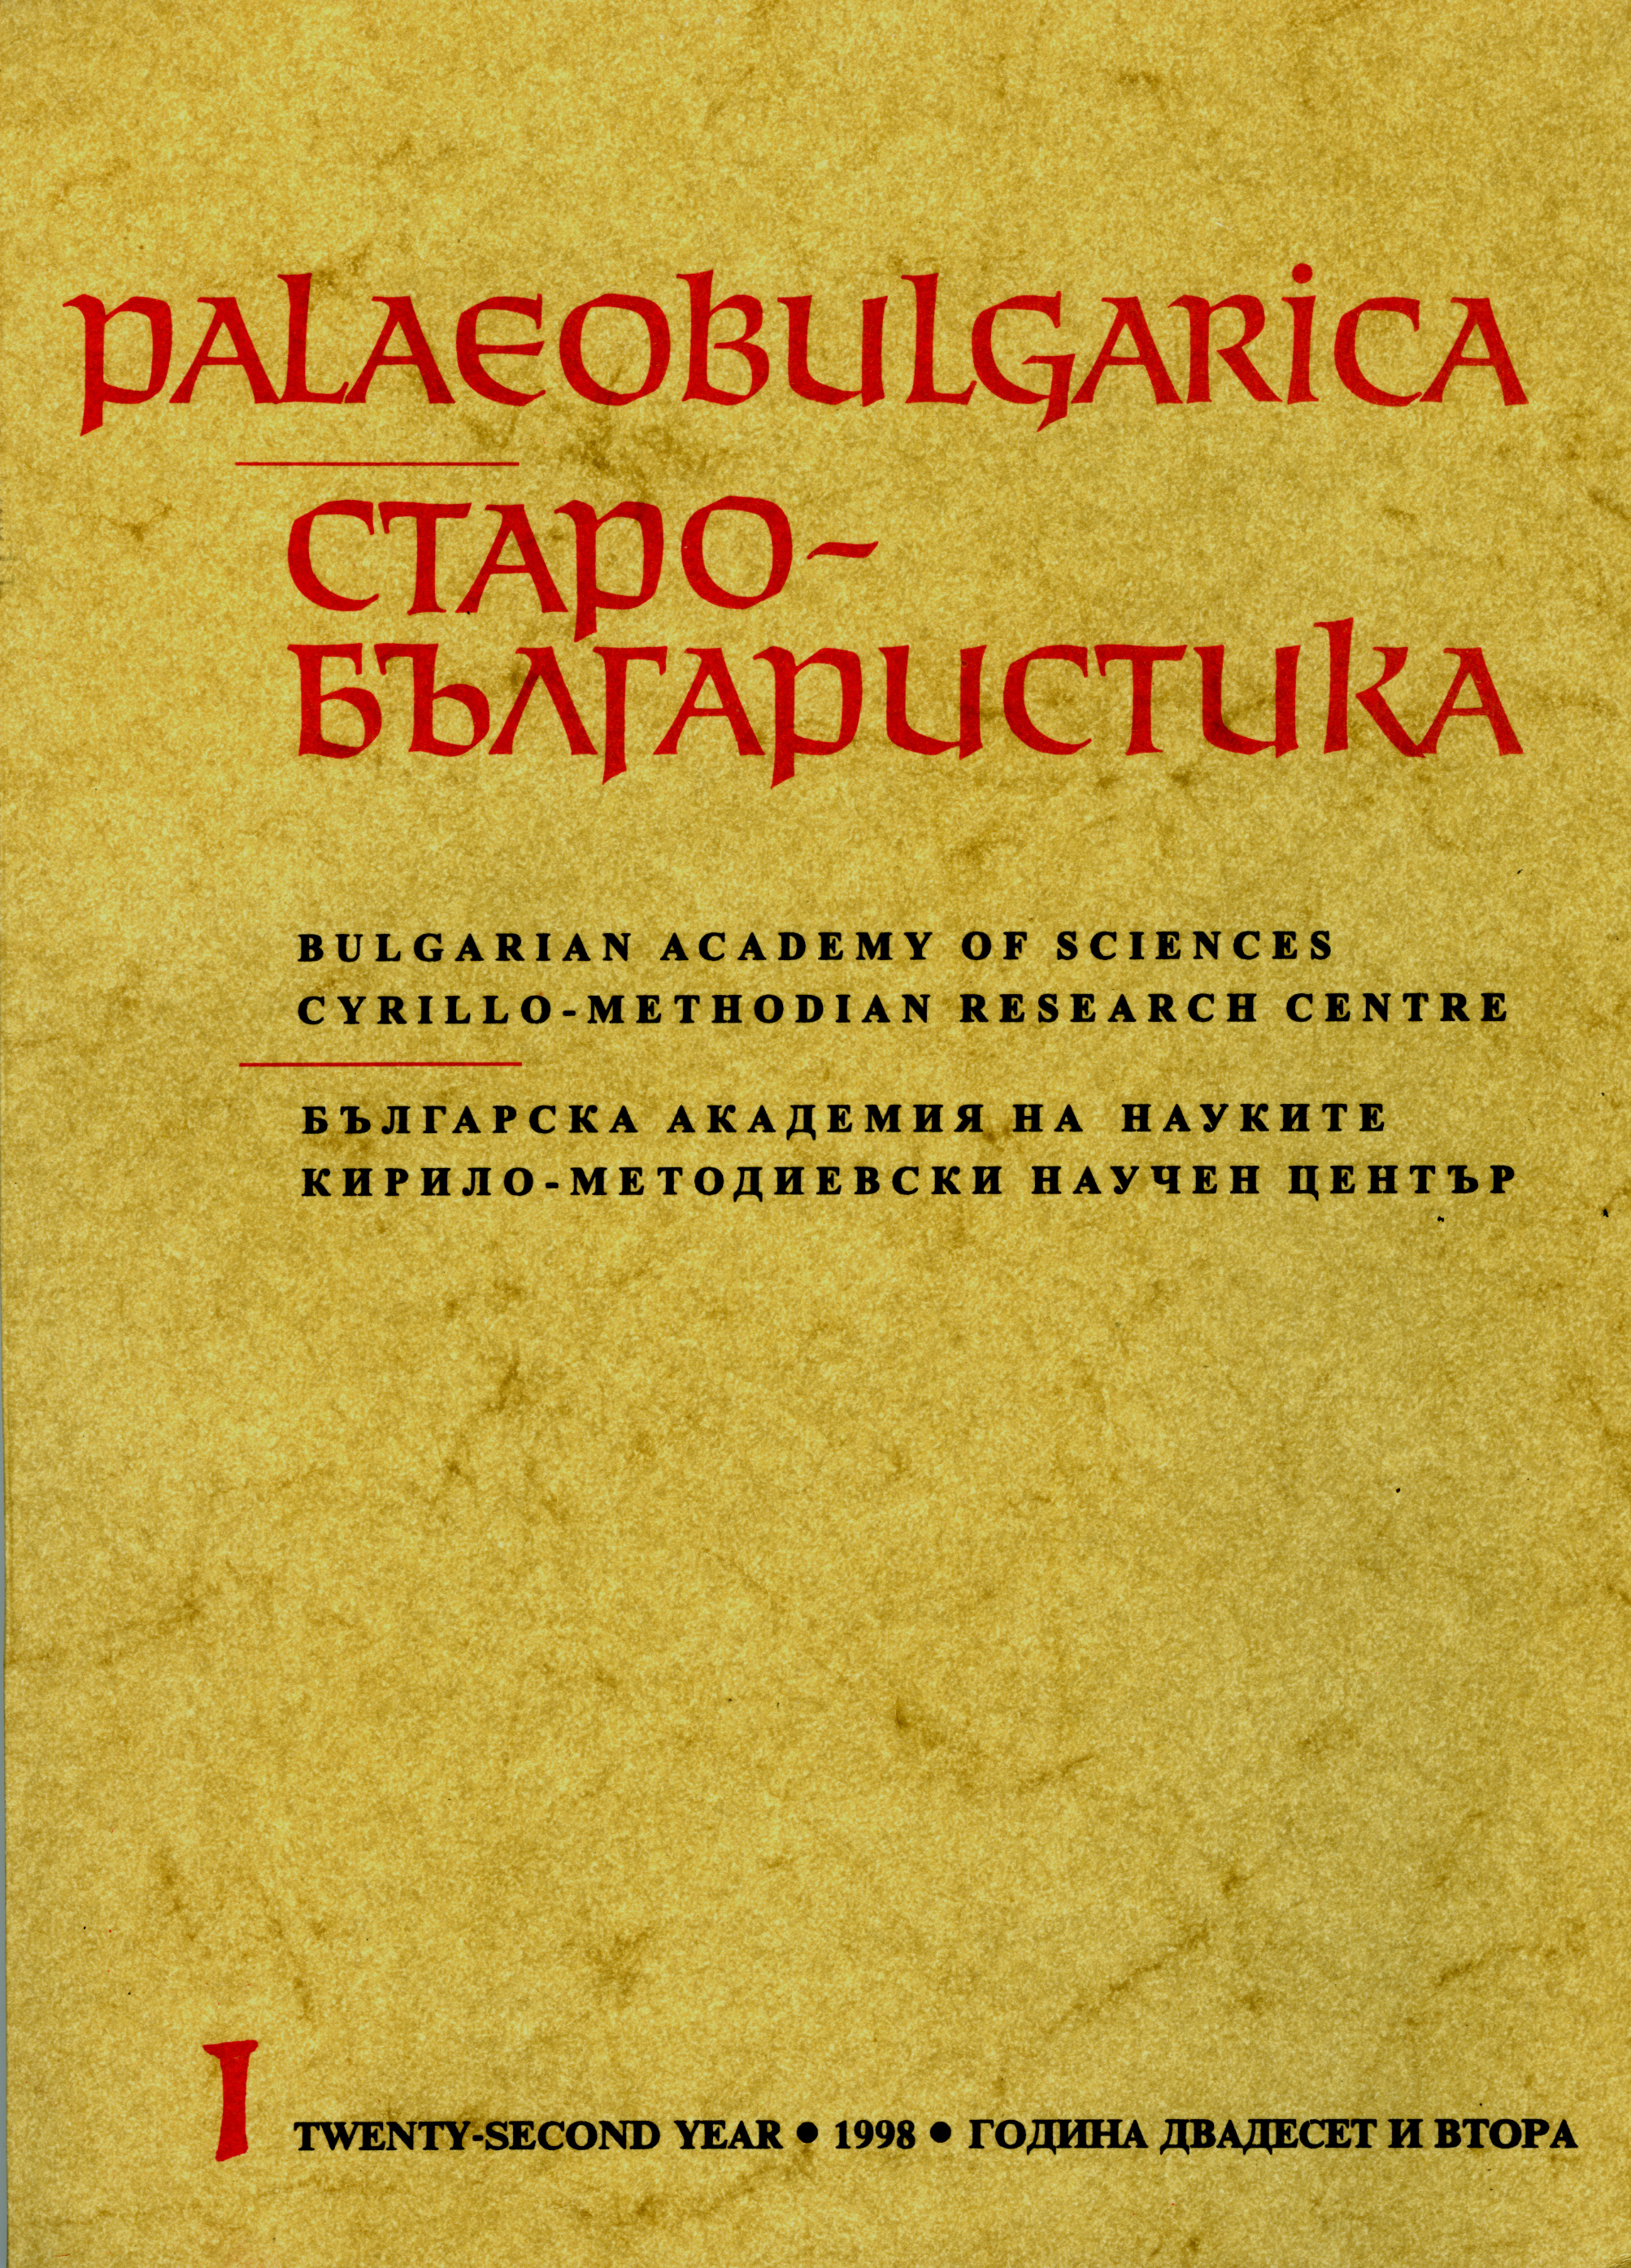 A Tenth-Century Graffito of St. Basil the Great in the Light of His Cult in Eastern Monasticism Cover Image